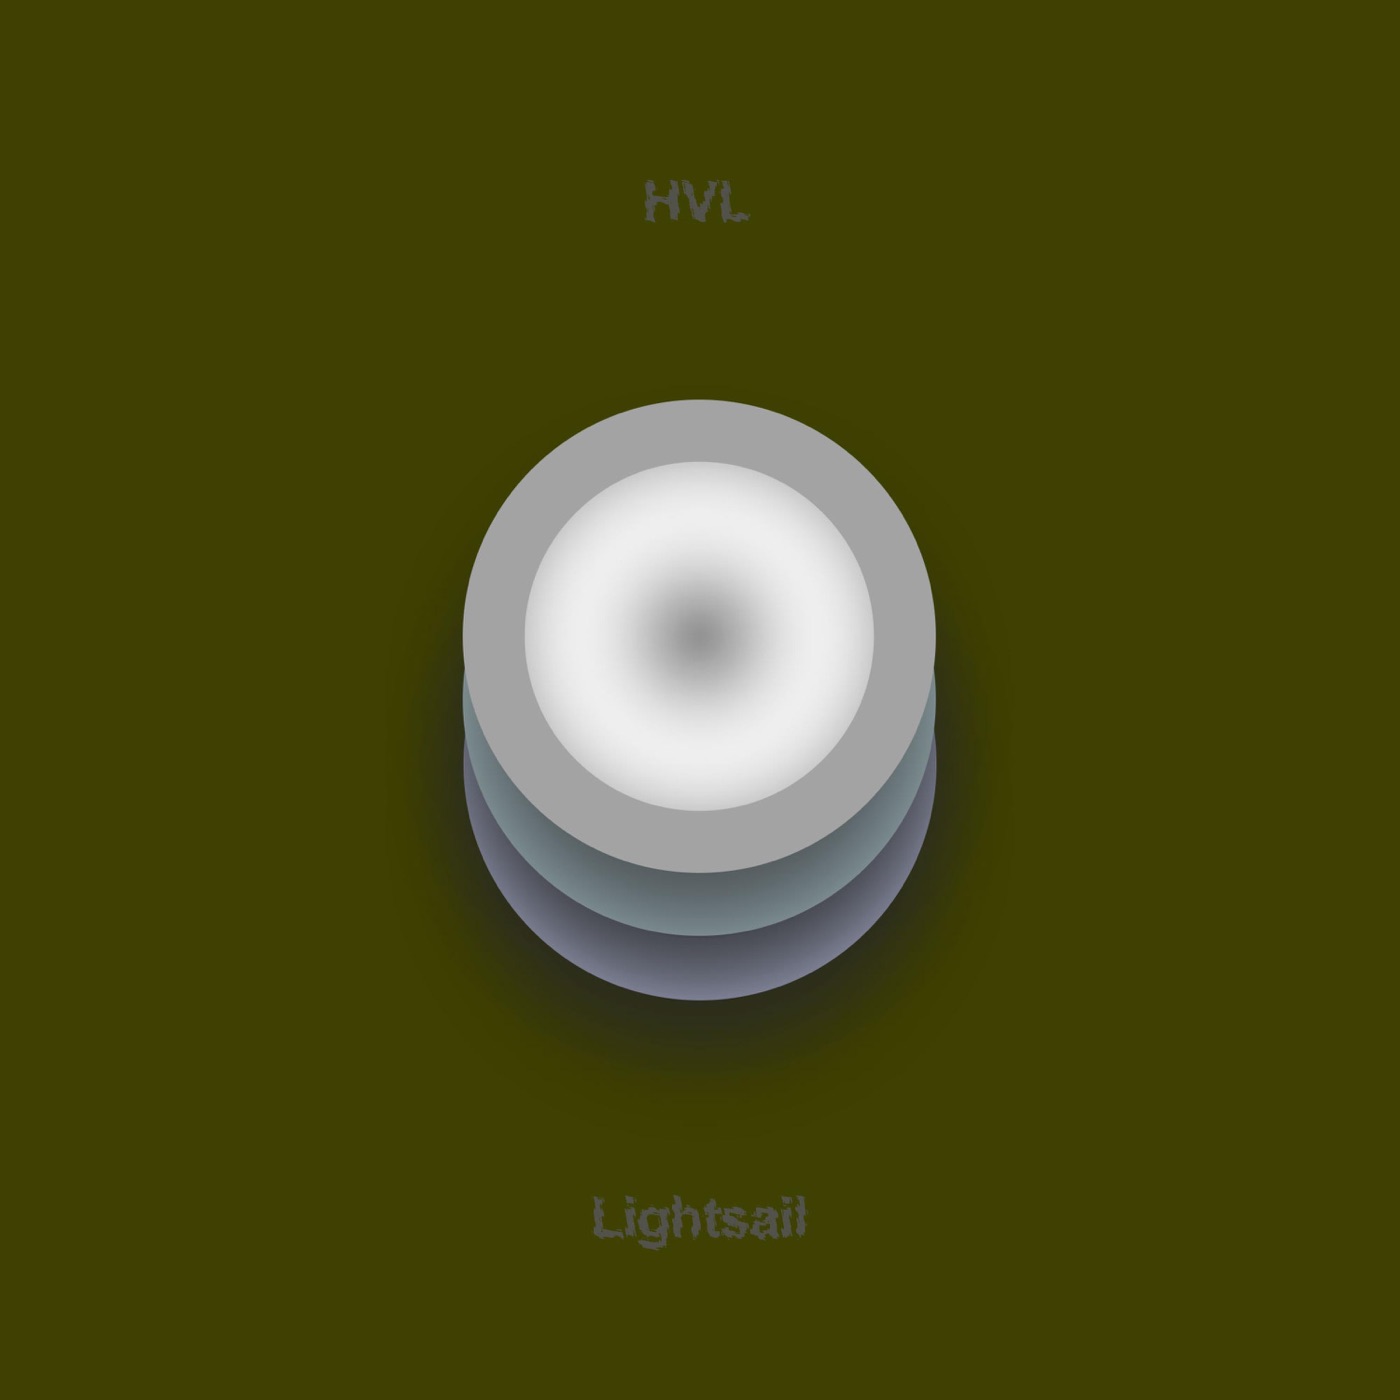 Lightsail by HVL